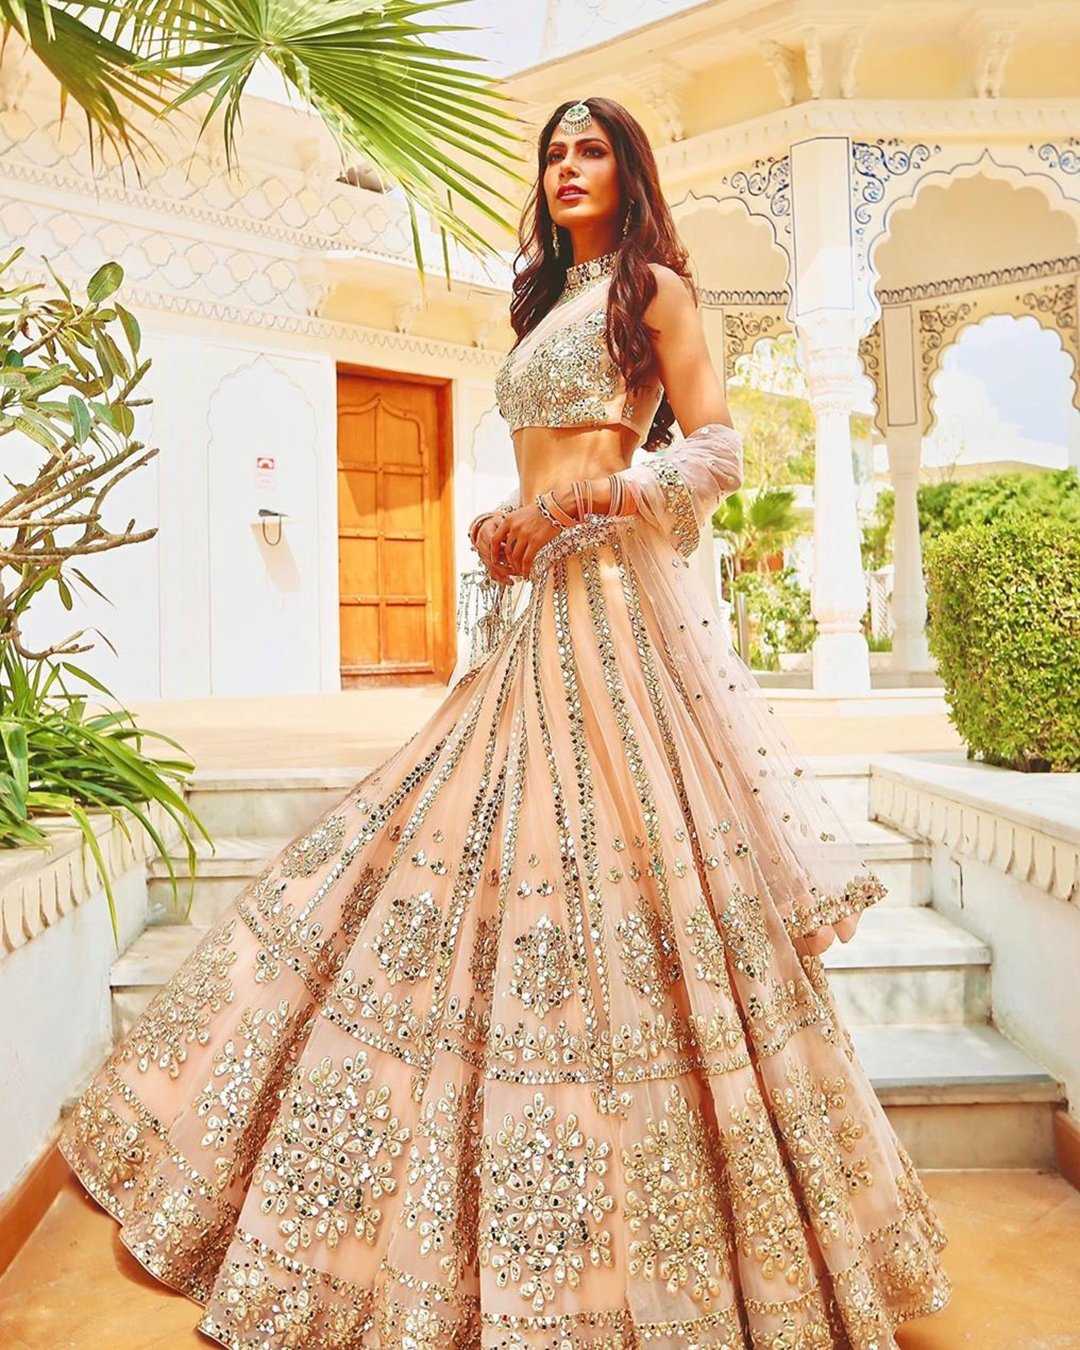 25 Indian Bridal Wear Notes To Influence Your Own Look